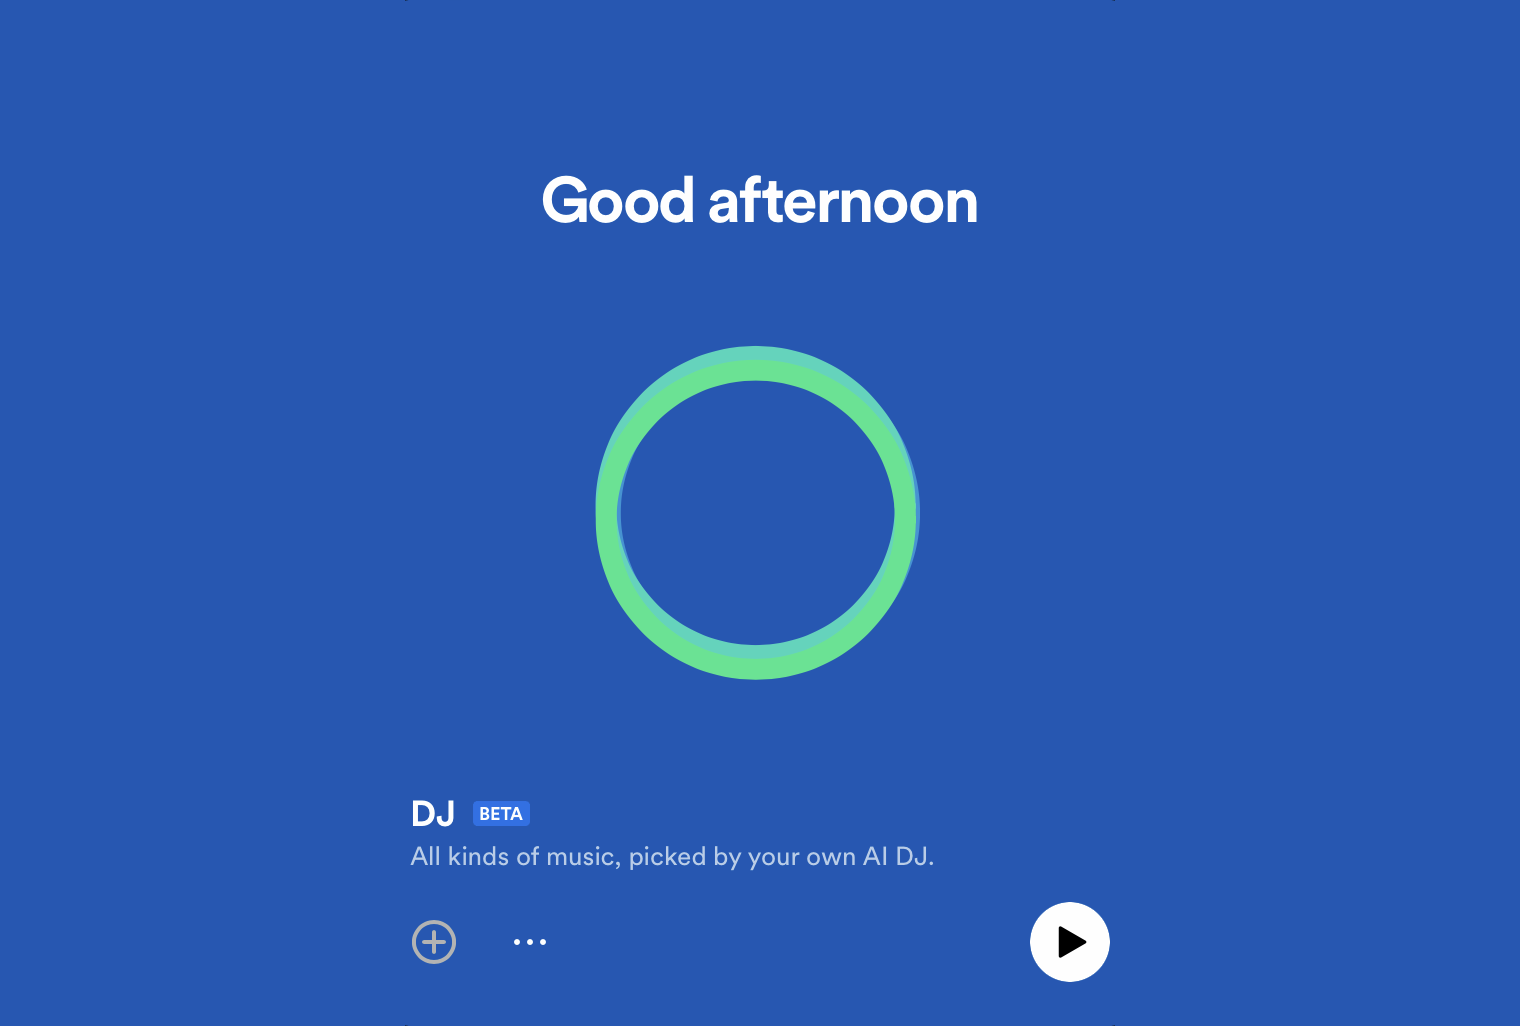 A green circle on a blue background, with text "Good afternoon"